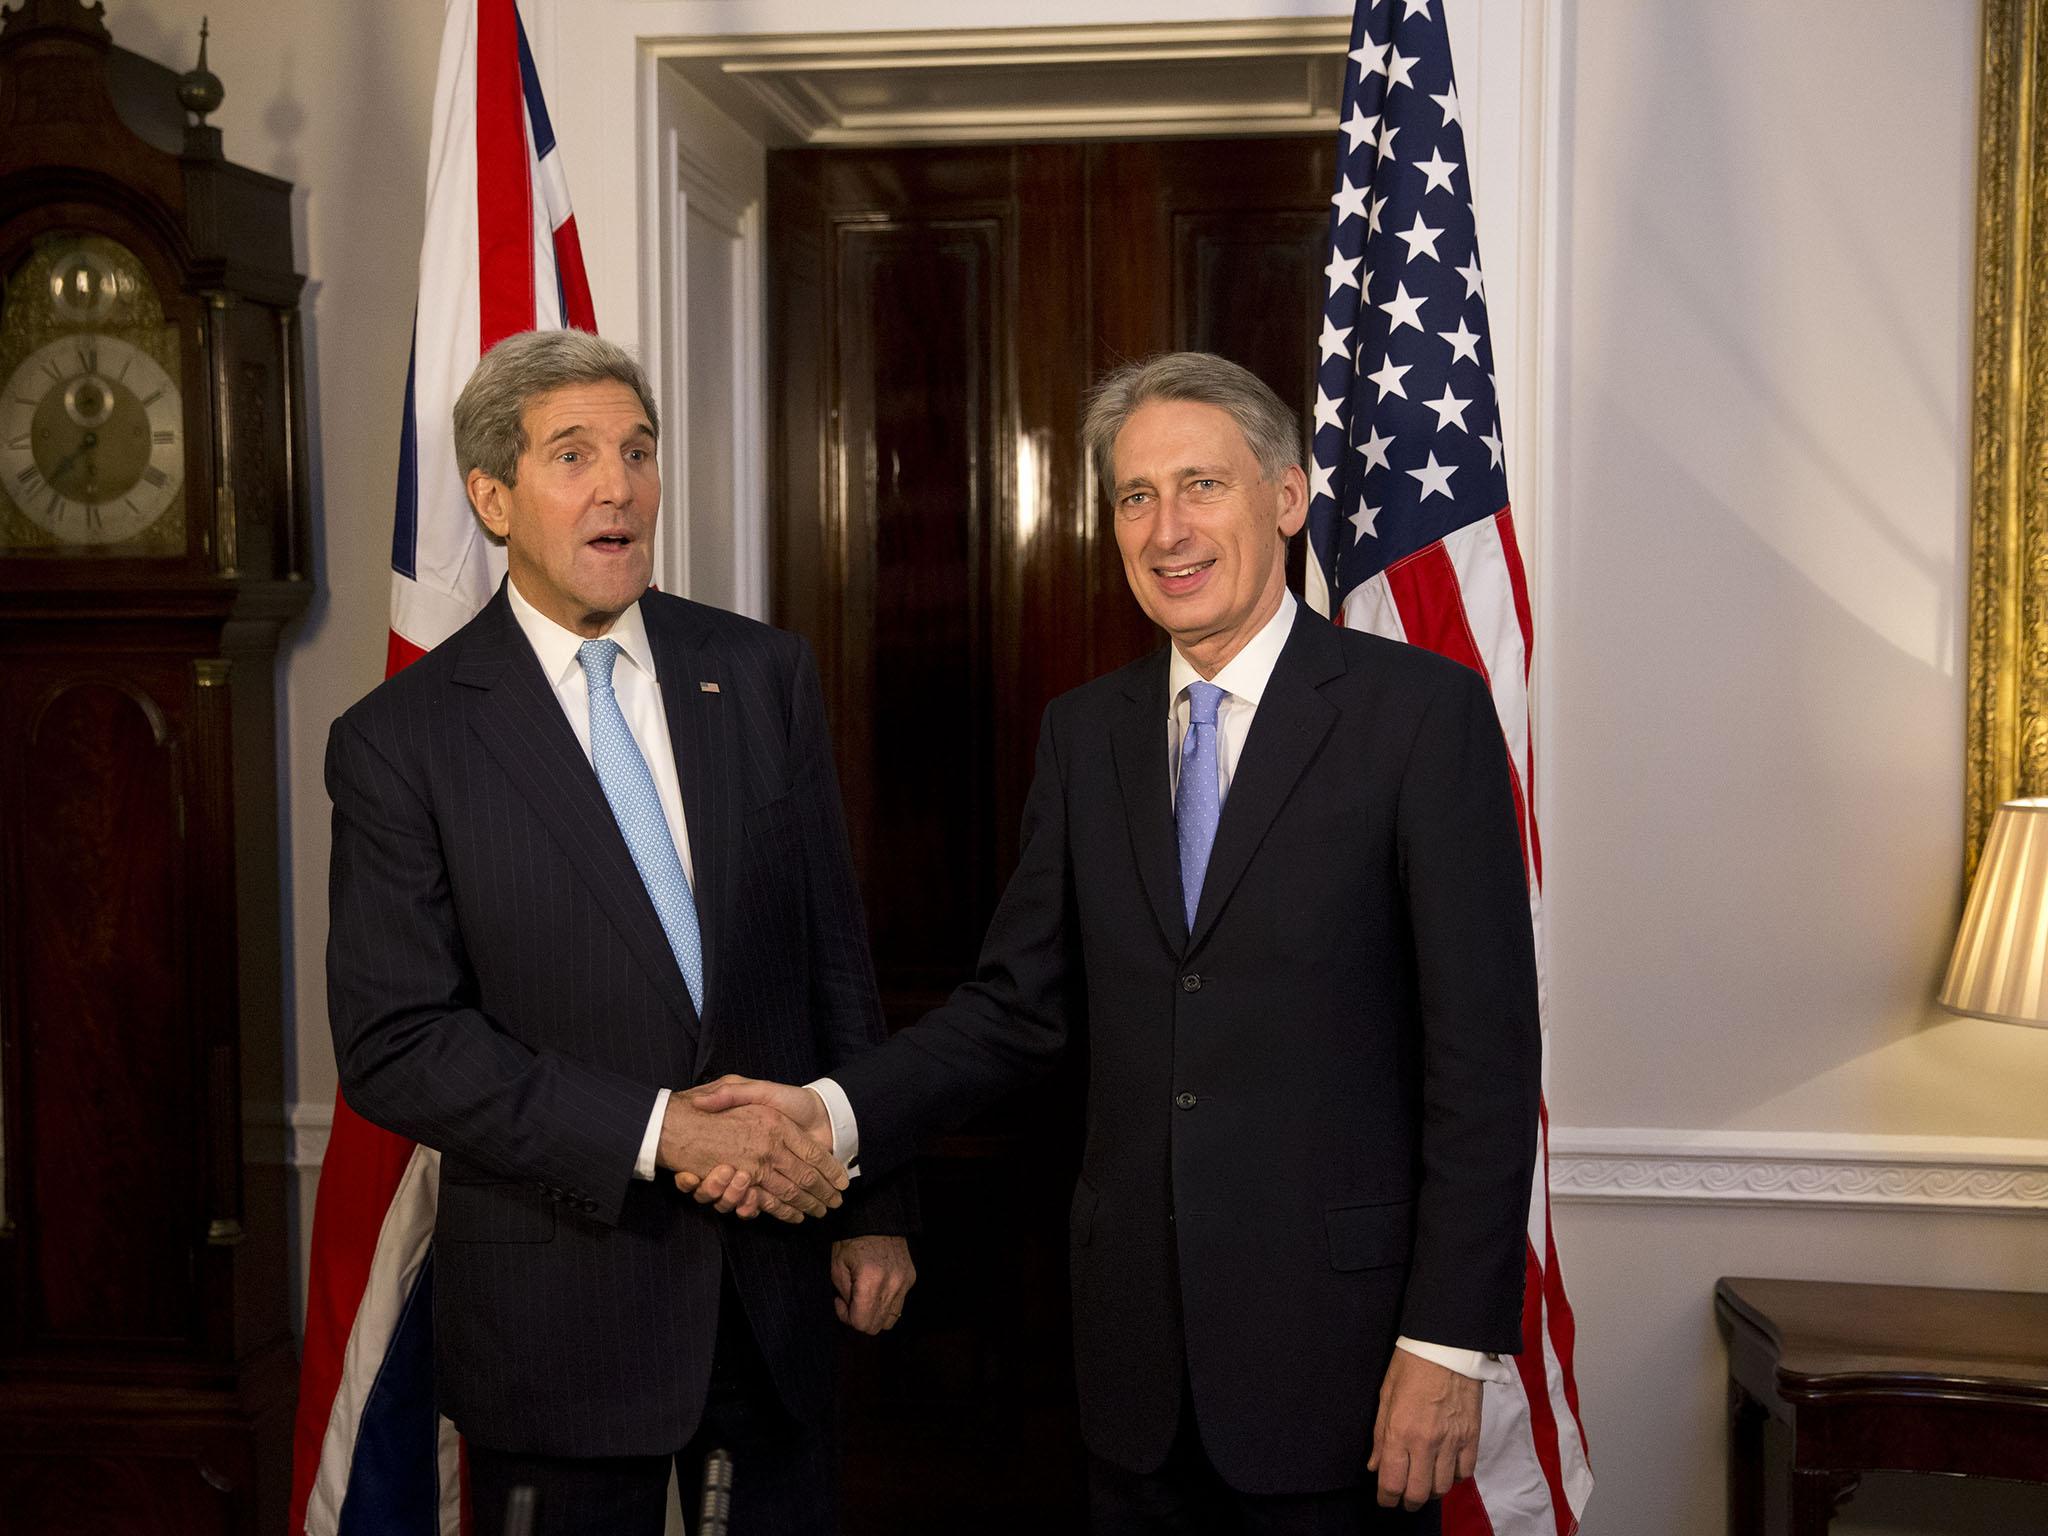 The relationship between the US and the UK, as embodied by Secretary of State John Kerry and Foreign Secretary Philip Hammond, is under threat